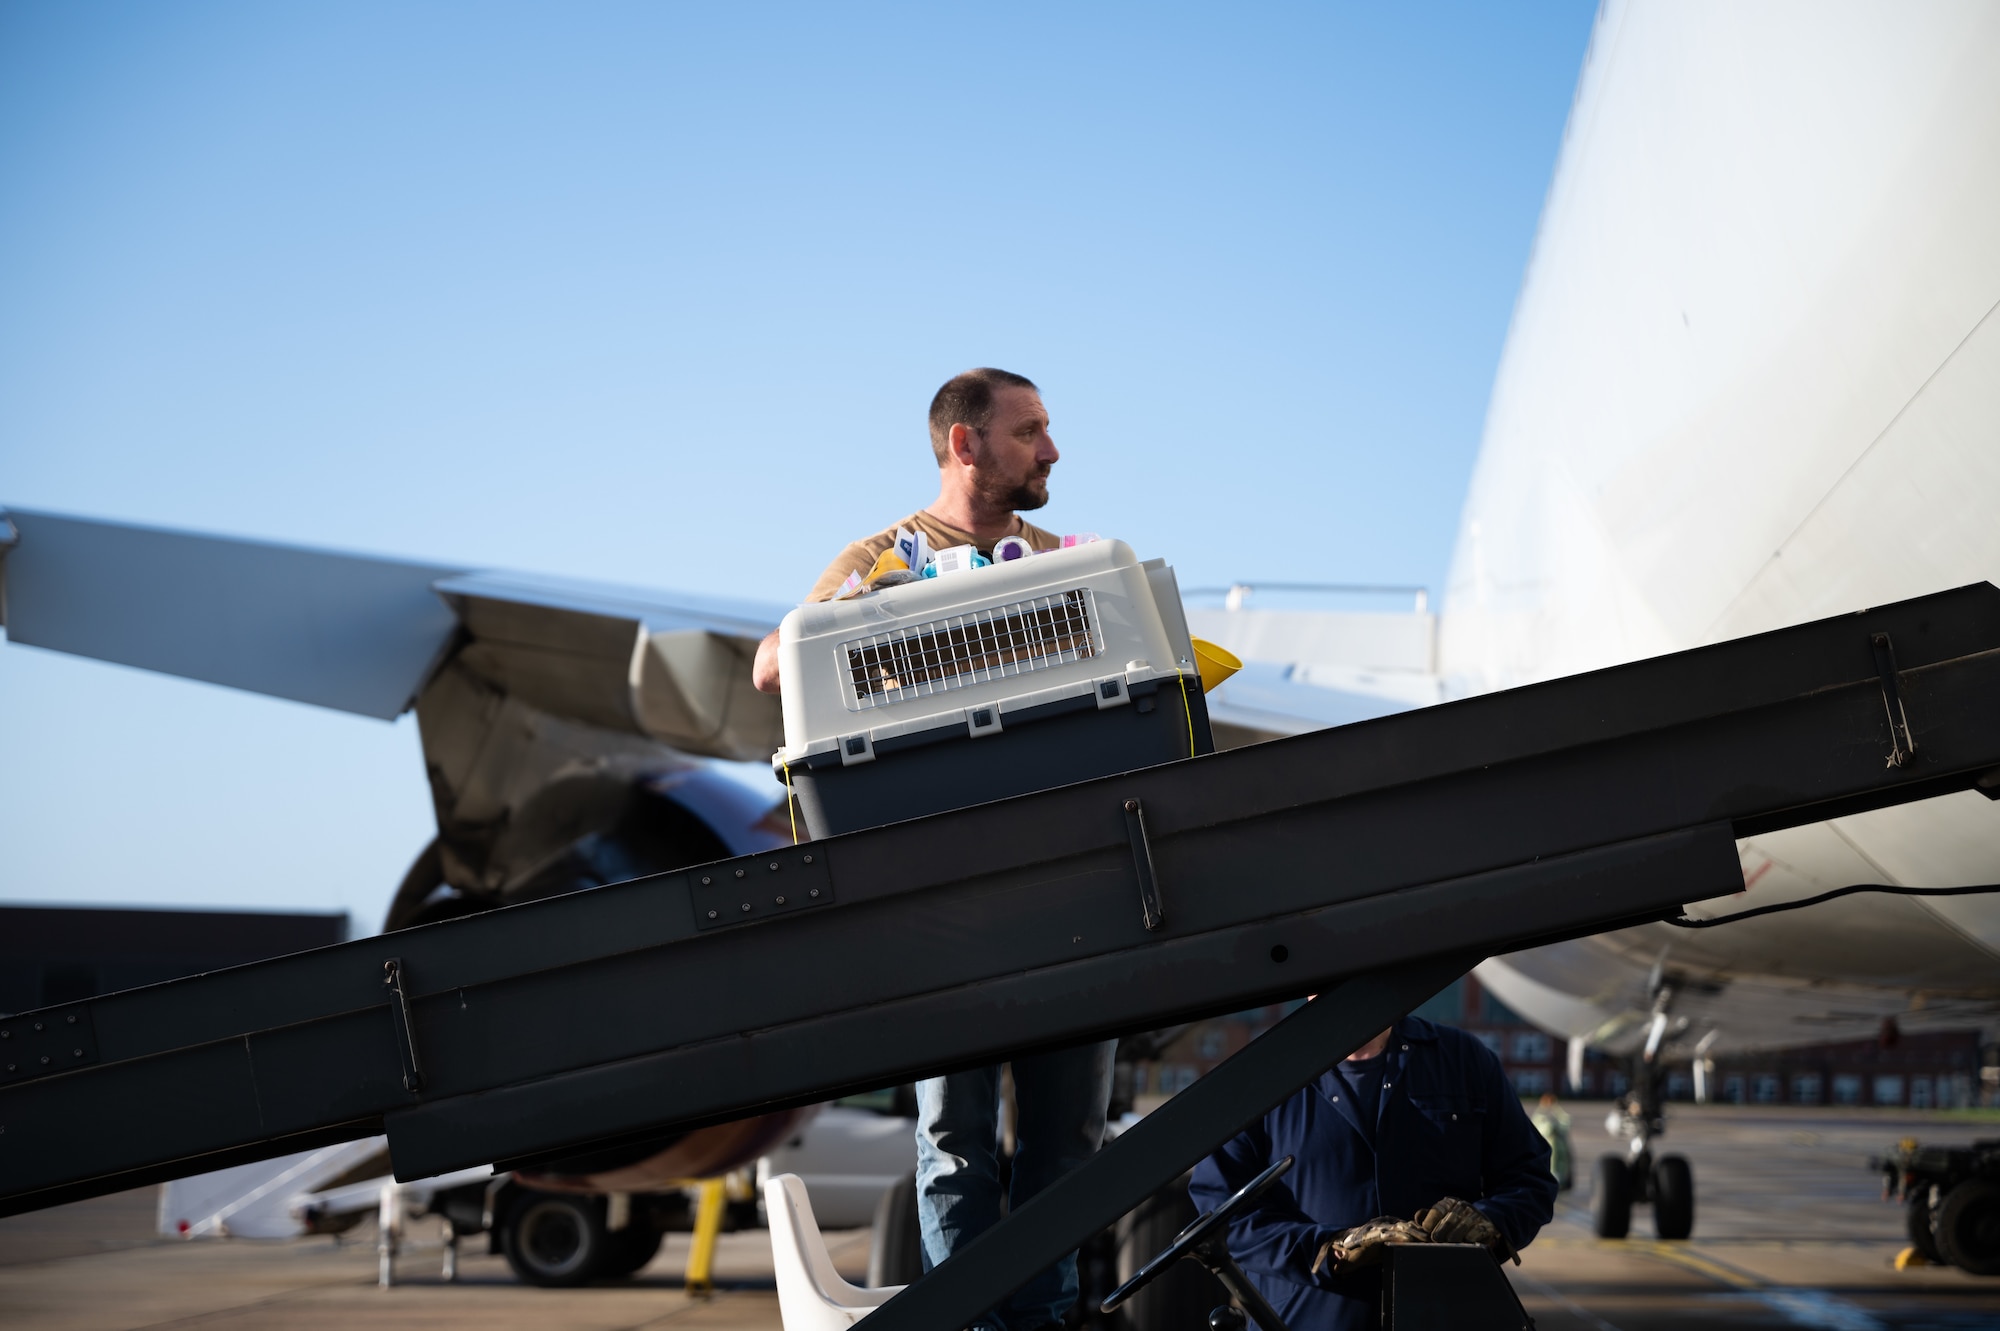 A U.S. Air Force fleet service contractor guides a pet carrier onto the Patriot Express, atRoyal Air Force Mildenhall, Dec. 20, 2022. The Patriot Express flight, also known as the rotator, helps alleviate the stress of members permanently changing station to the United Kingdom with pets by allowing for 10 pets in-cabin and 10 pets in the aircraft belly. (U.S. Air Force photo by Airman 1st Class Viviam Chiu)